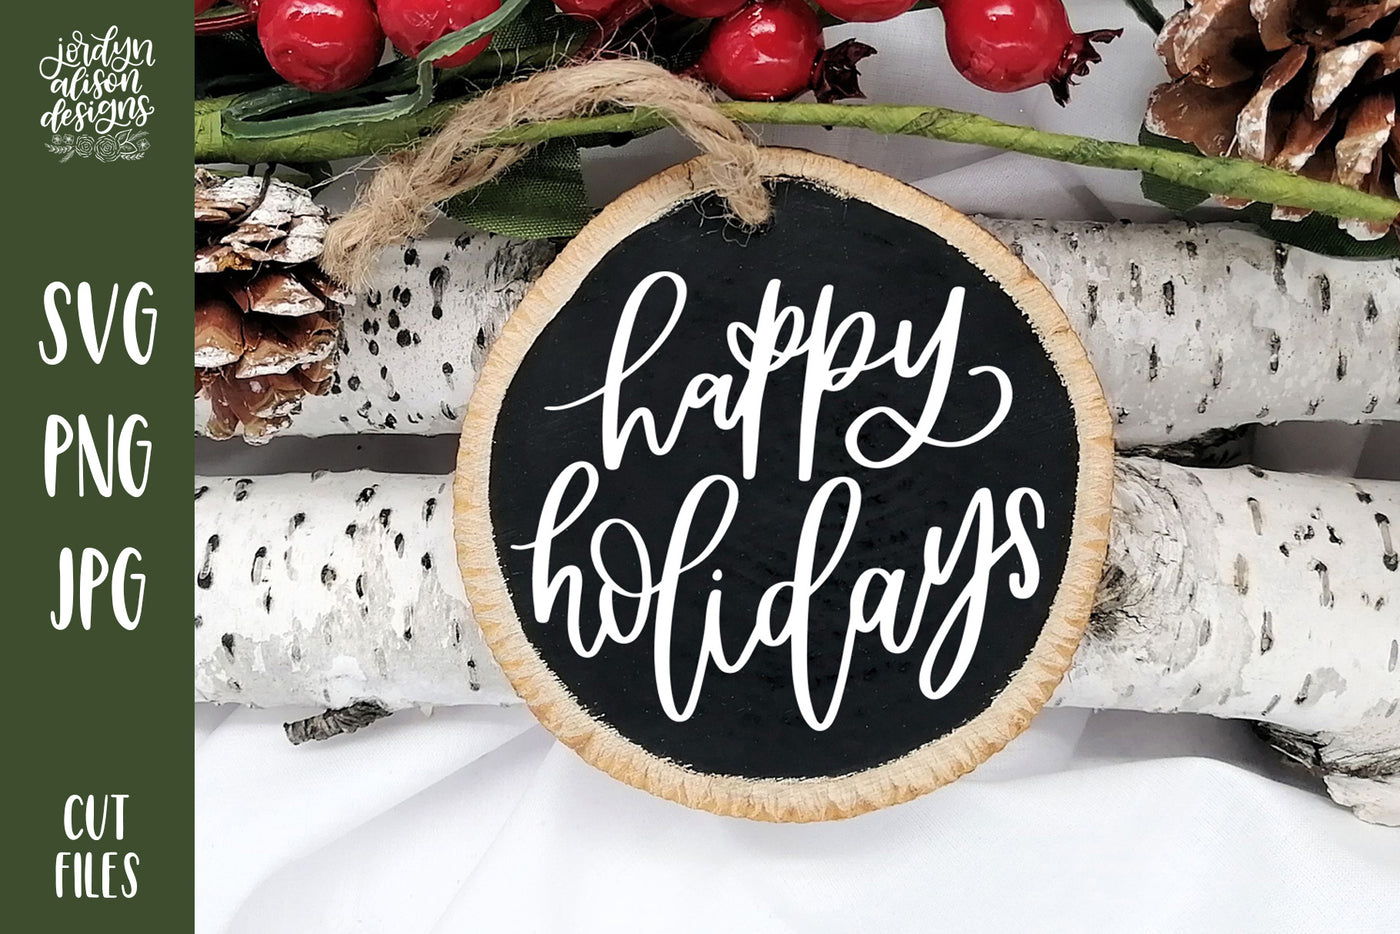 Handwritten text "Happy Holidays" on Round Christmas Ornament. 